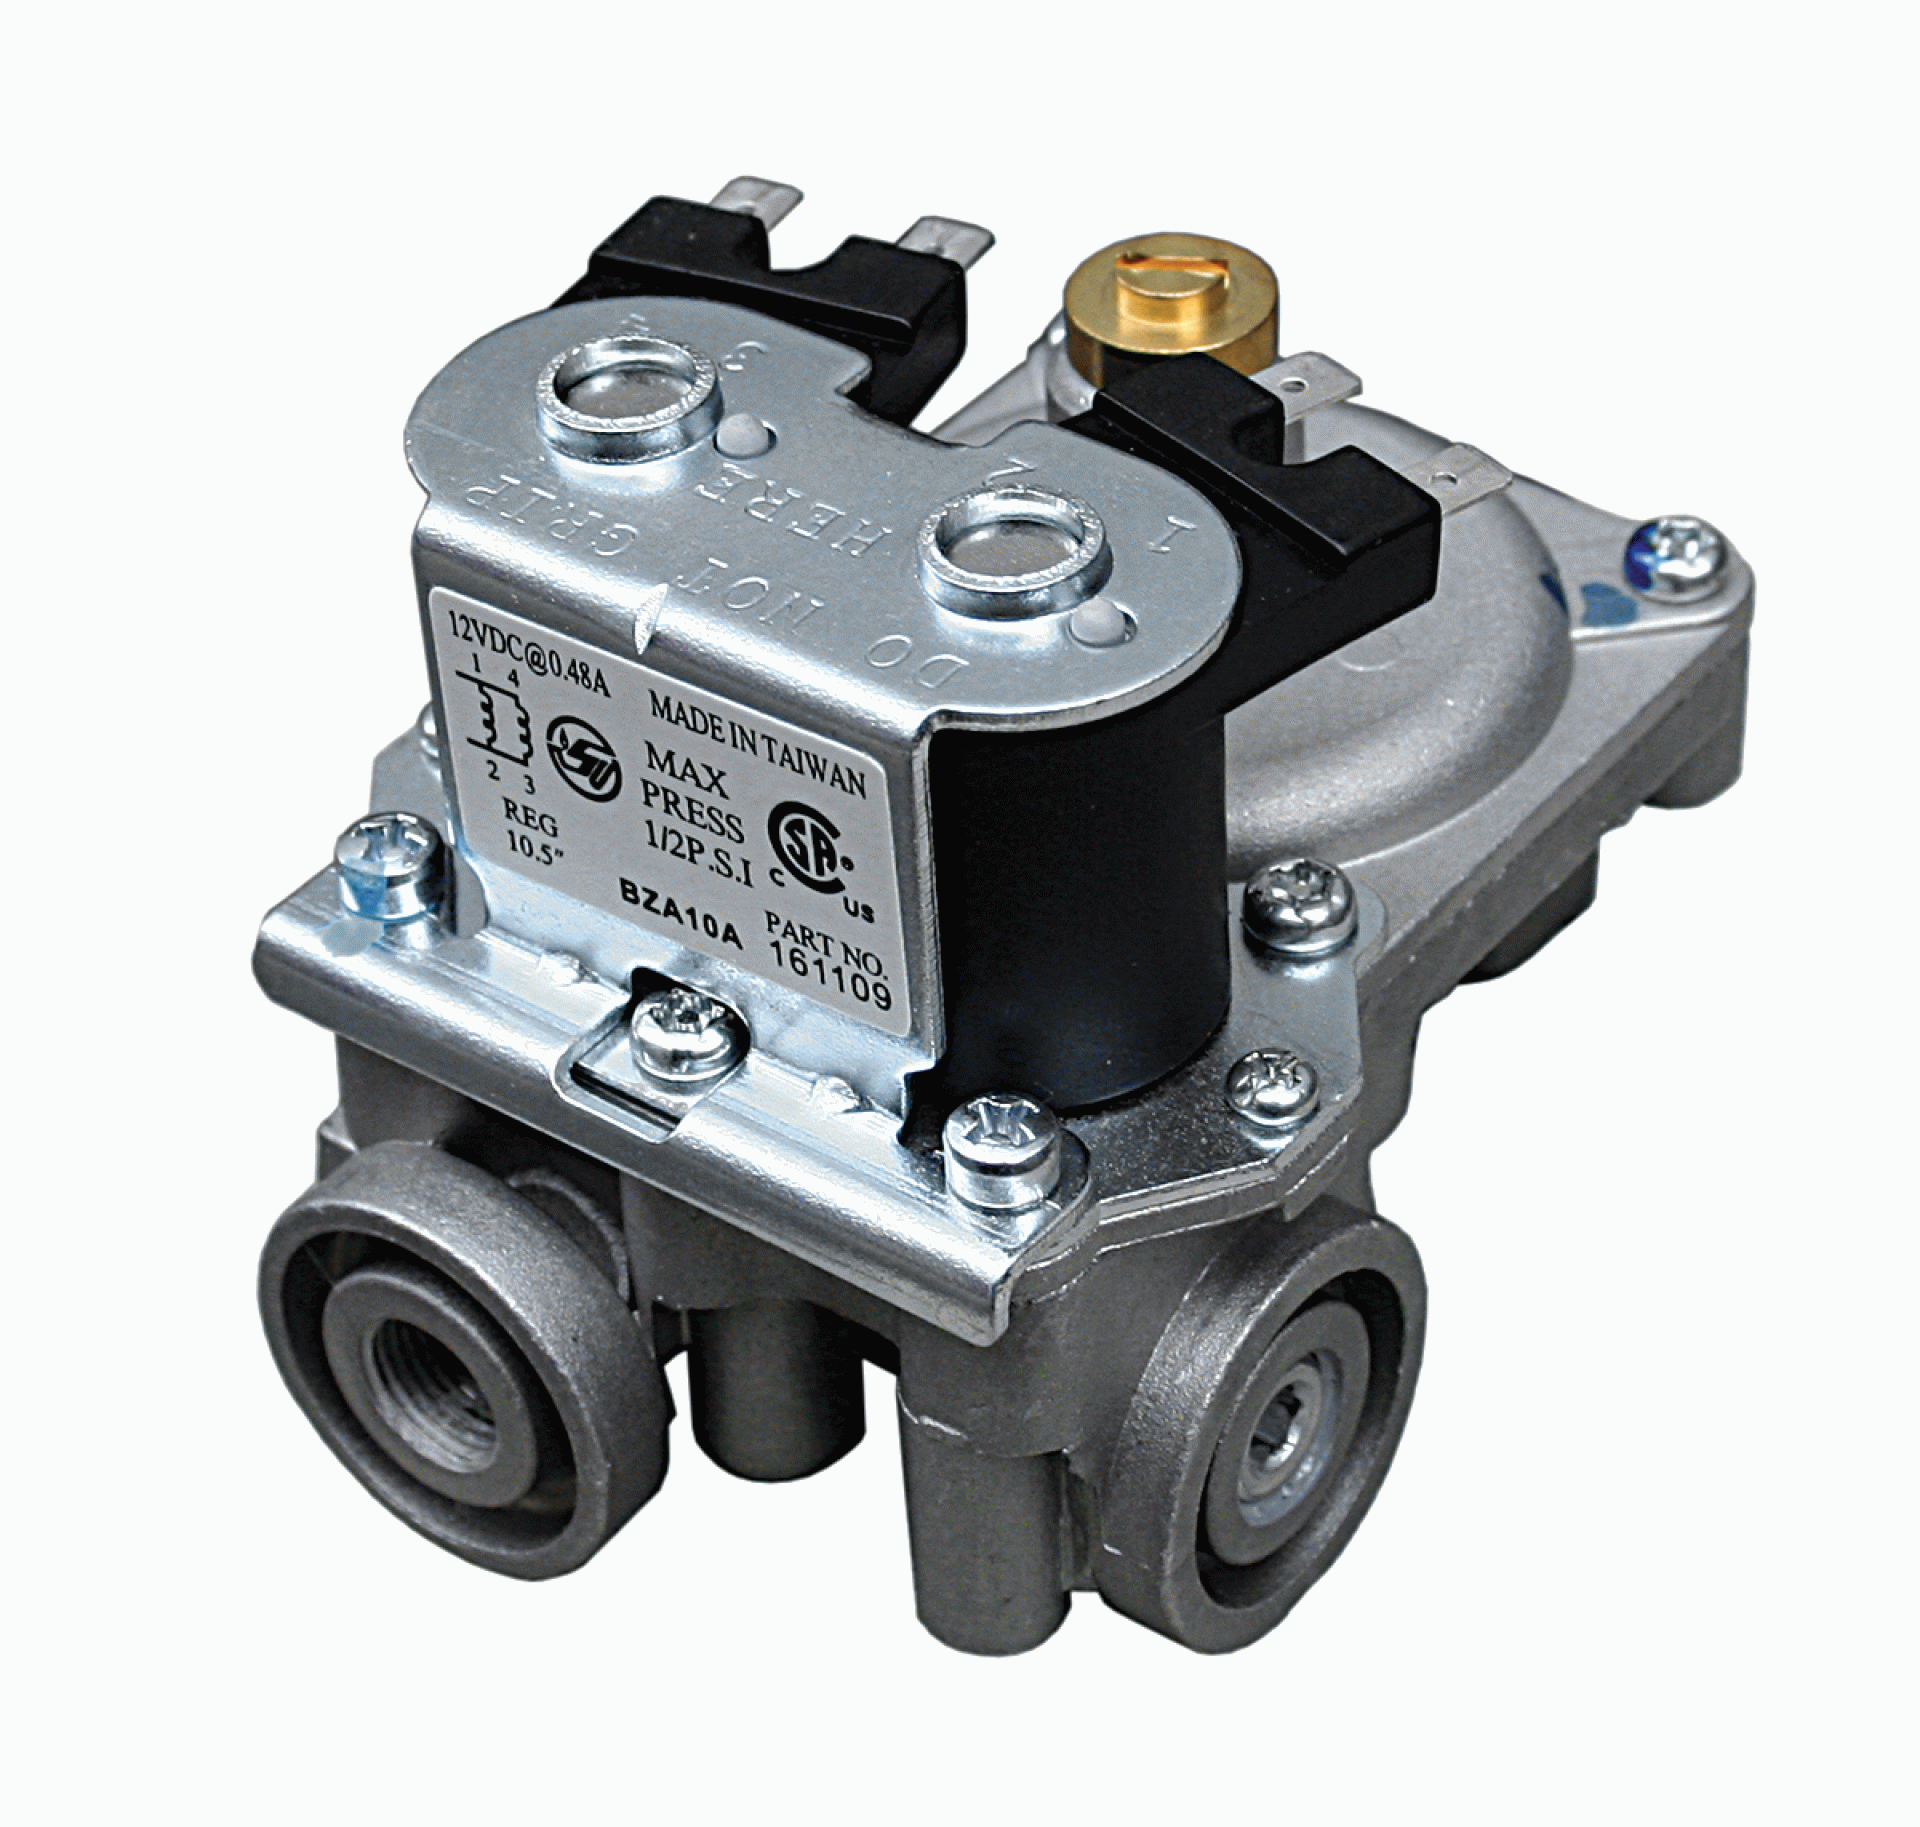 SUBURBAN MFG CO | 525042 | Gas Valve for Direct Spark Ignition